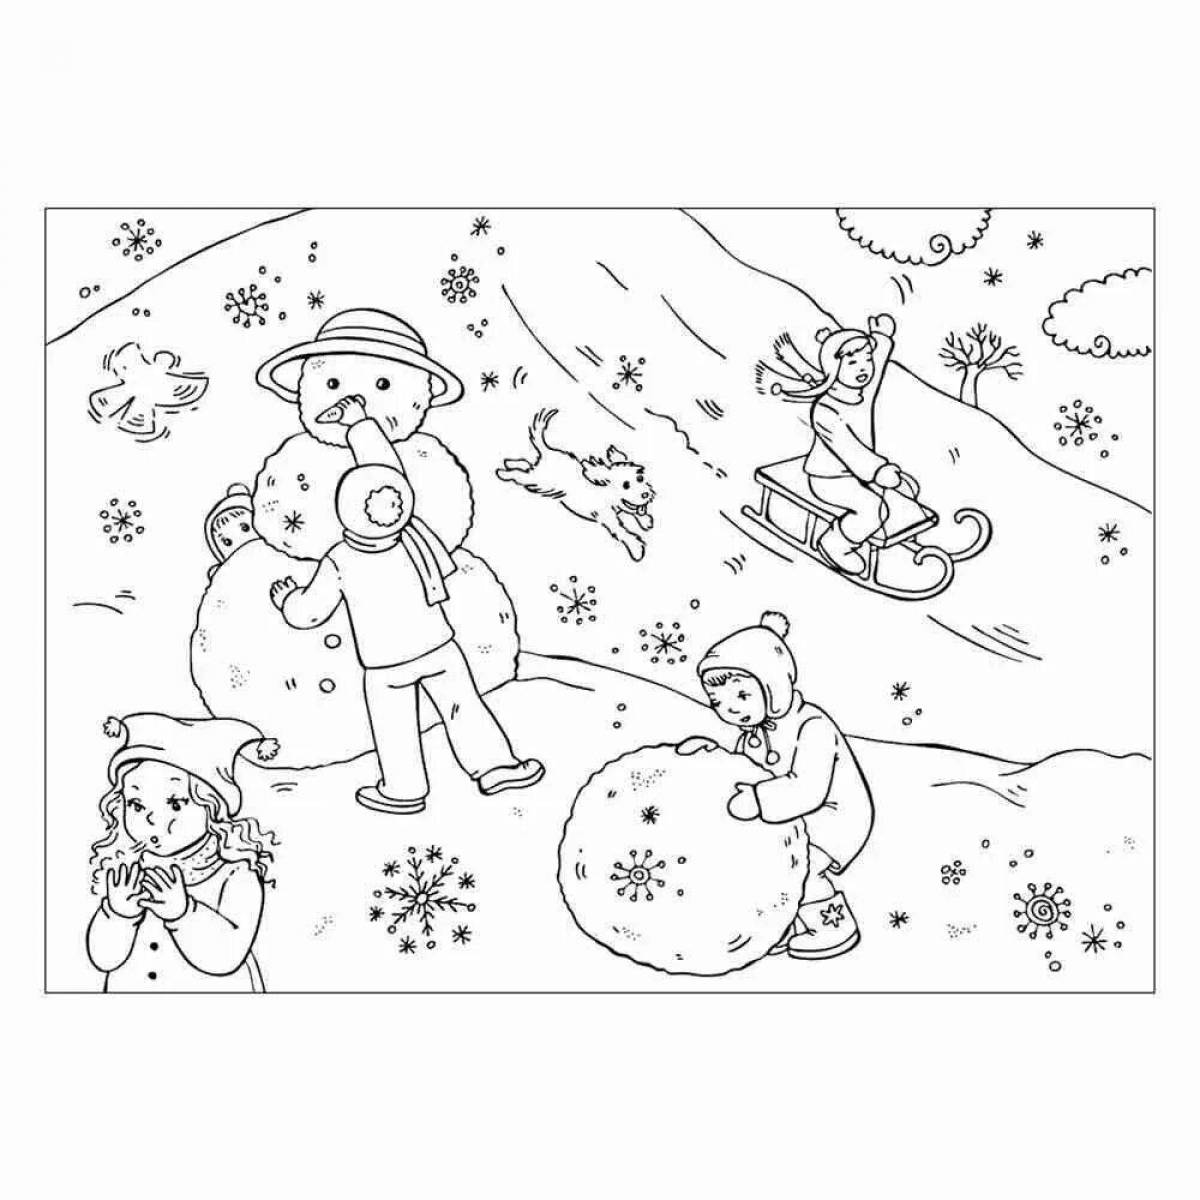 Inspirational winter games coloring book